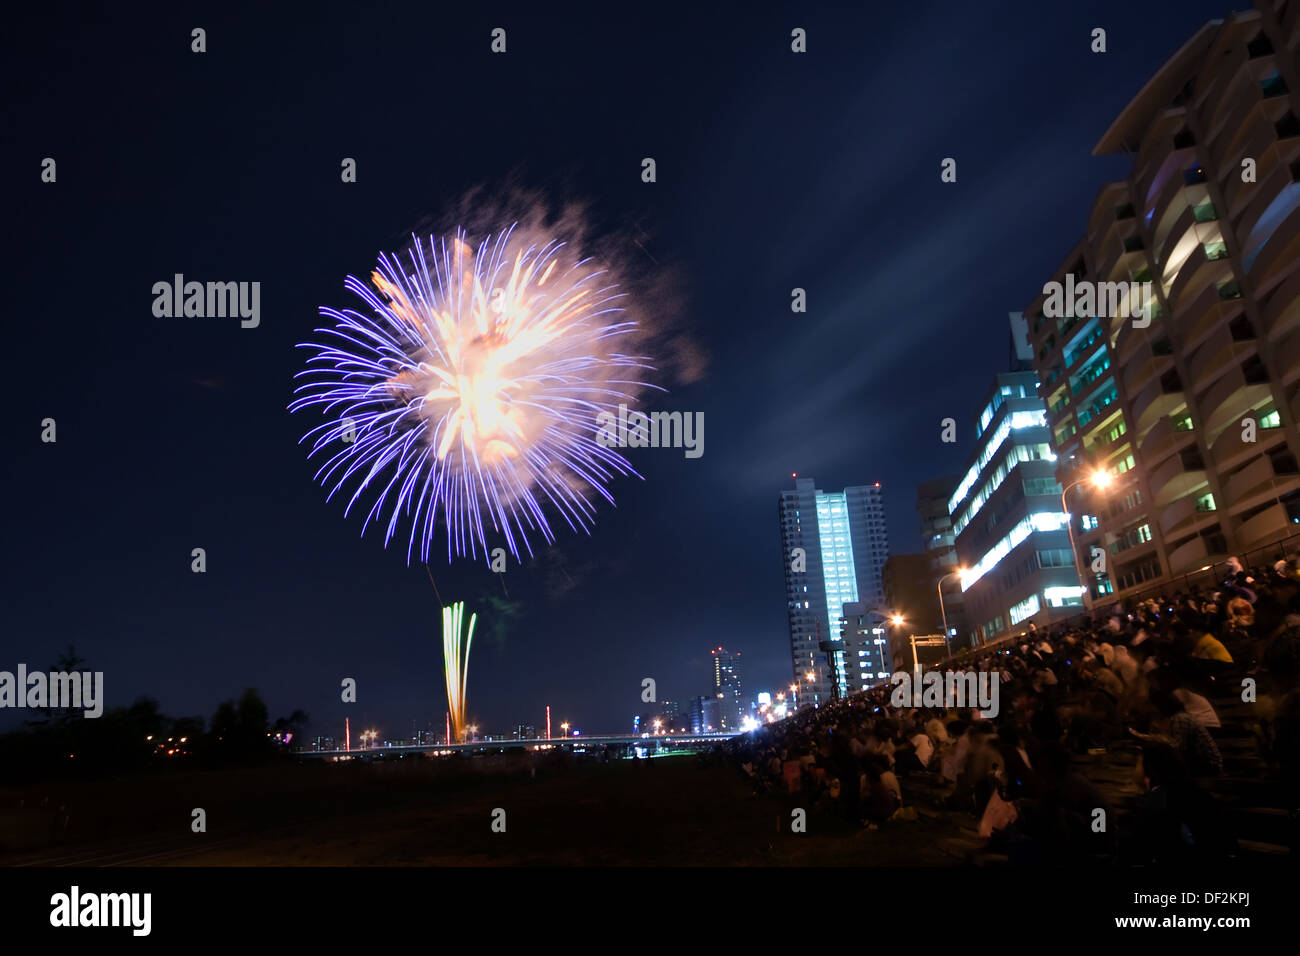 Crowd Of People Looking At Fireworks In Sky Stock Photo